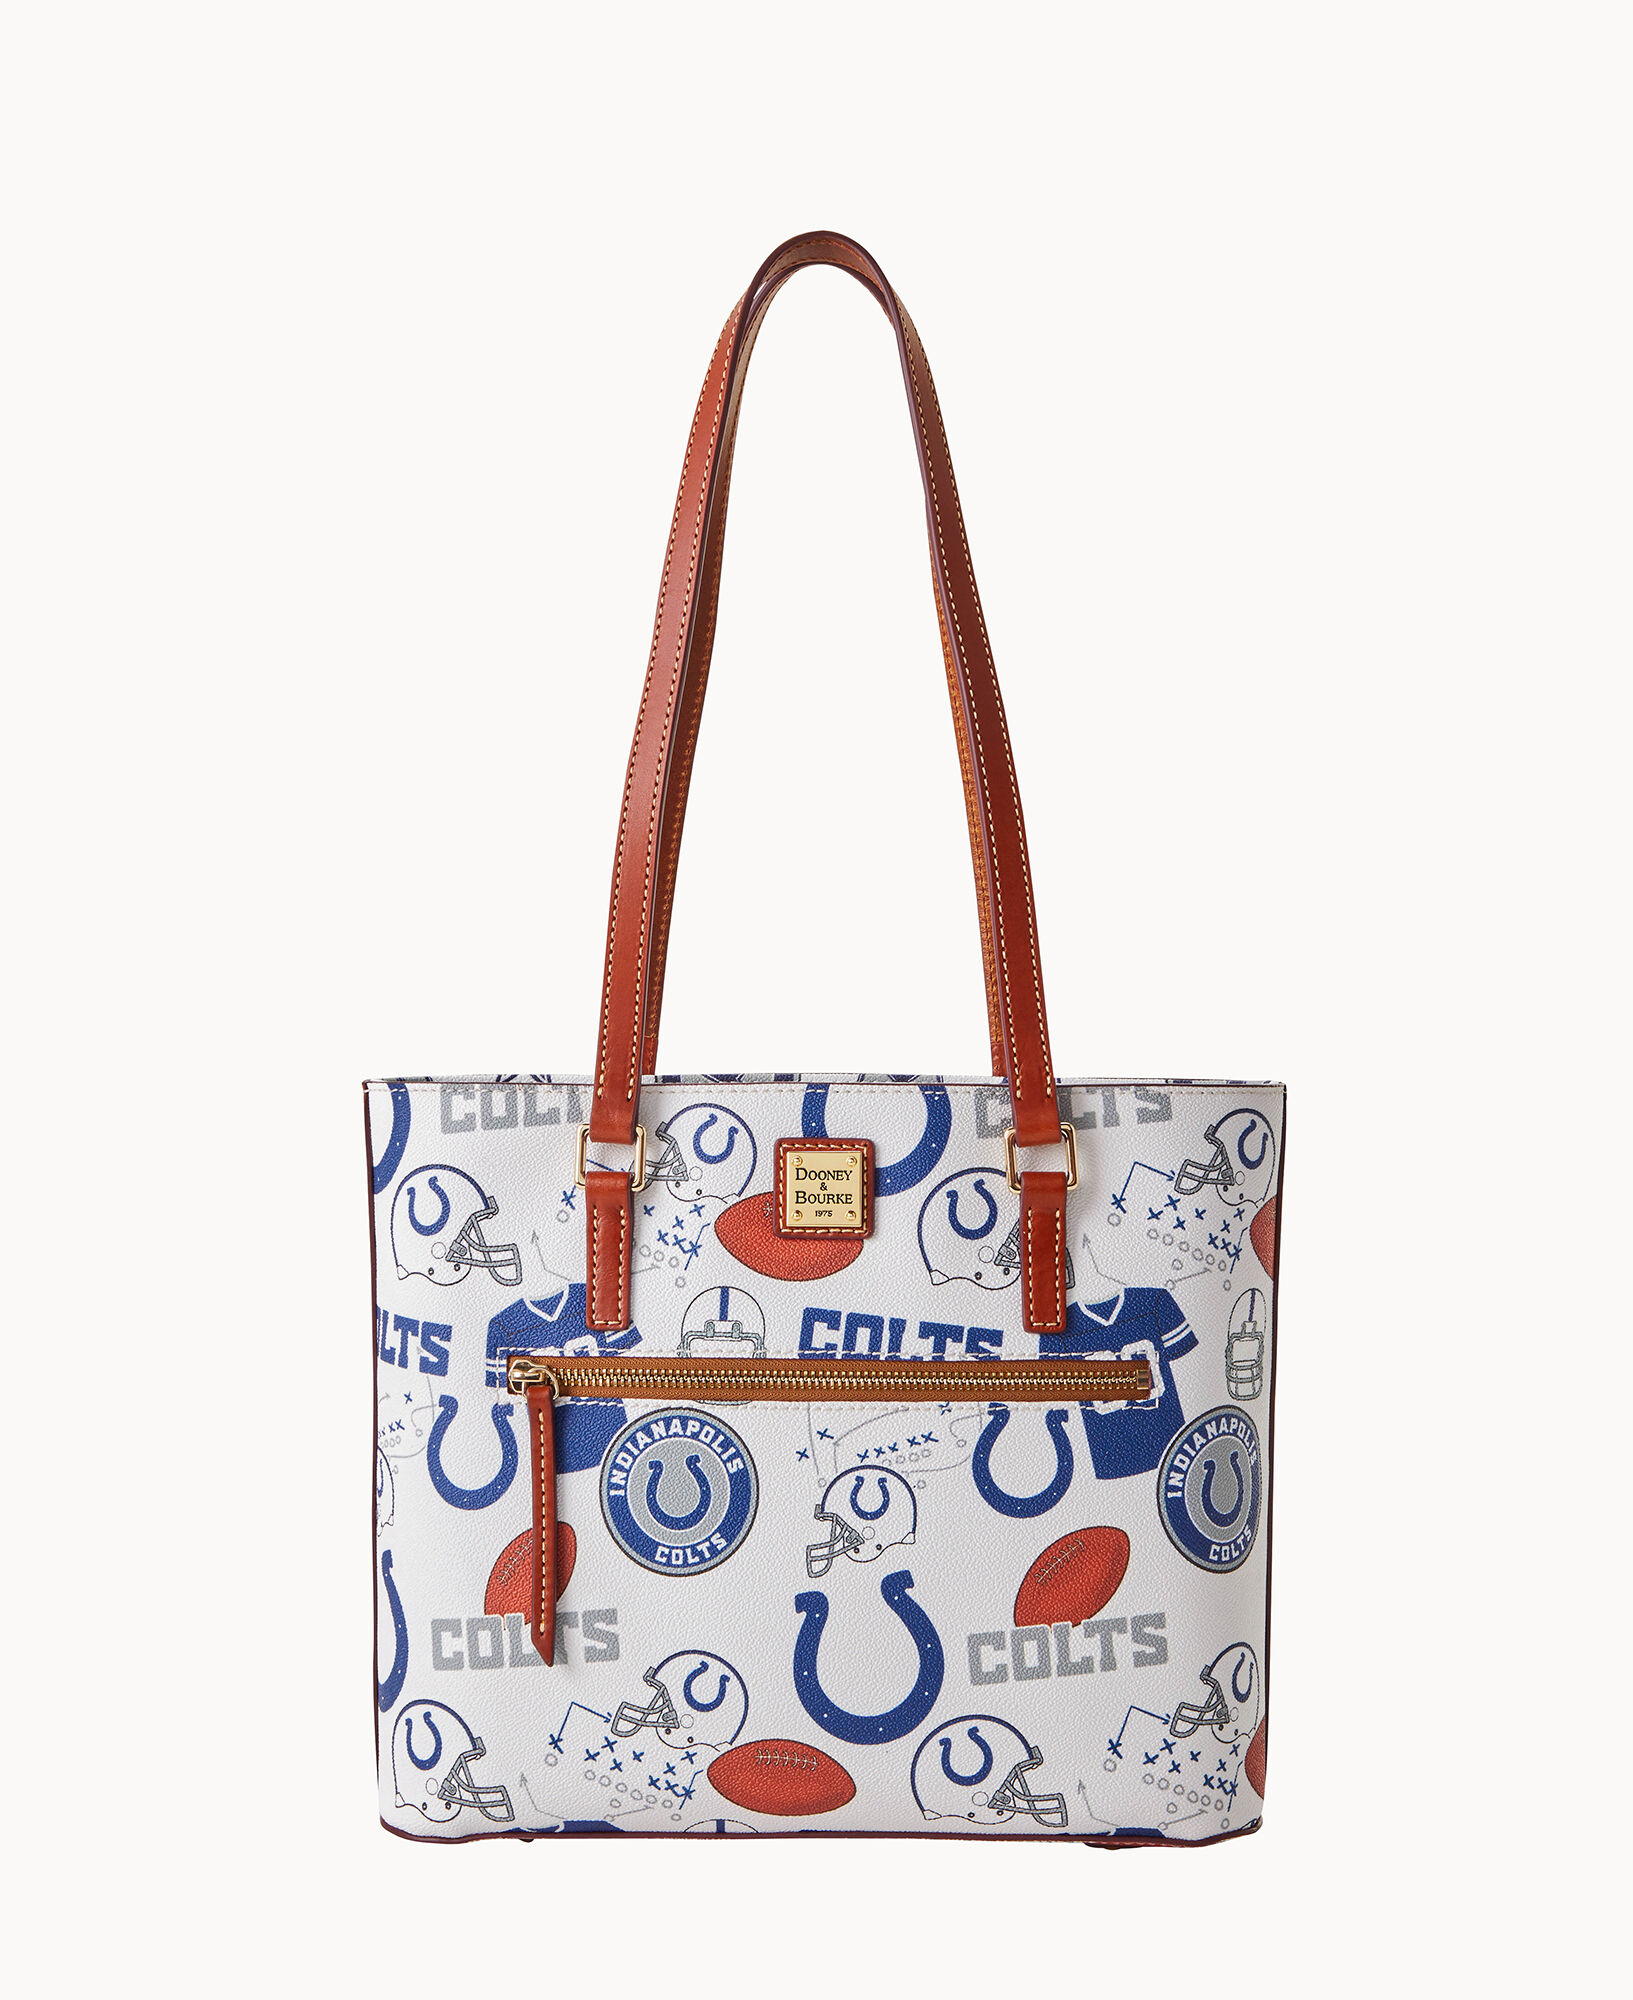 Buy Tote Bag Dooney and Bourke Online In India -  India